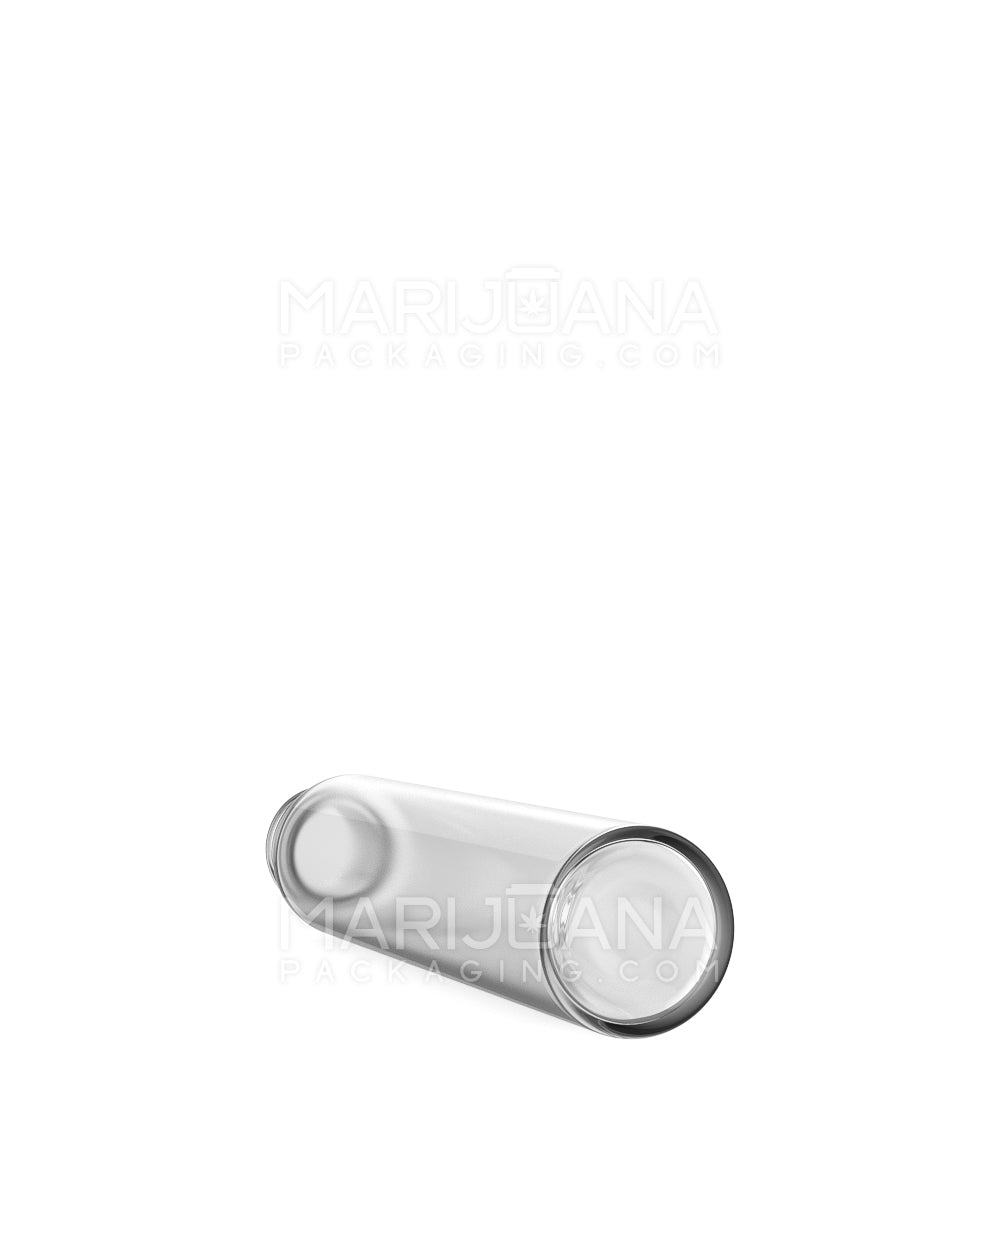 Child Resistant | Plastic Pre-Roll Tubes | 22mm - 120mm - 400 Count - 4